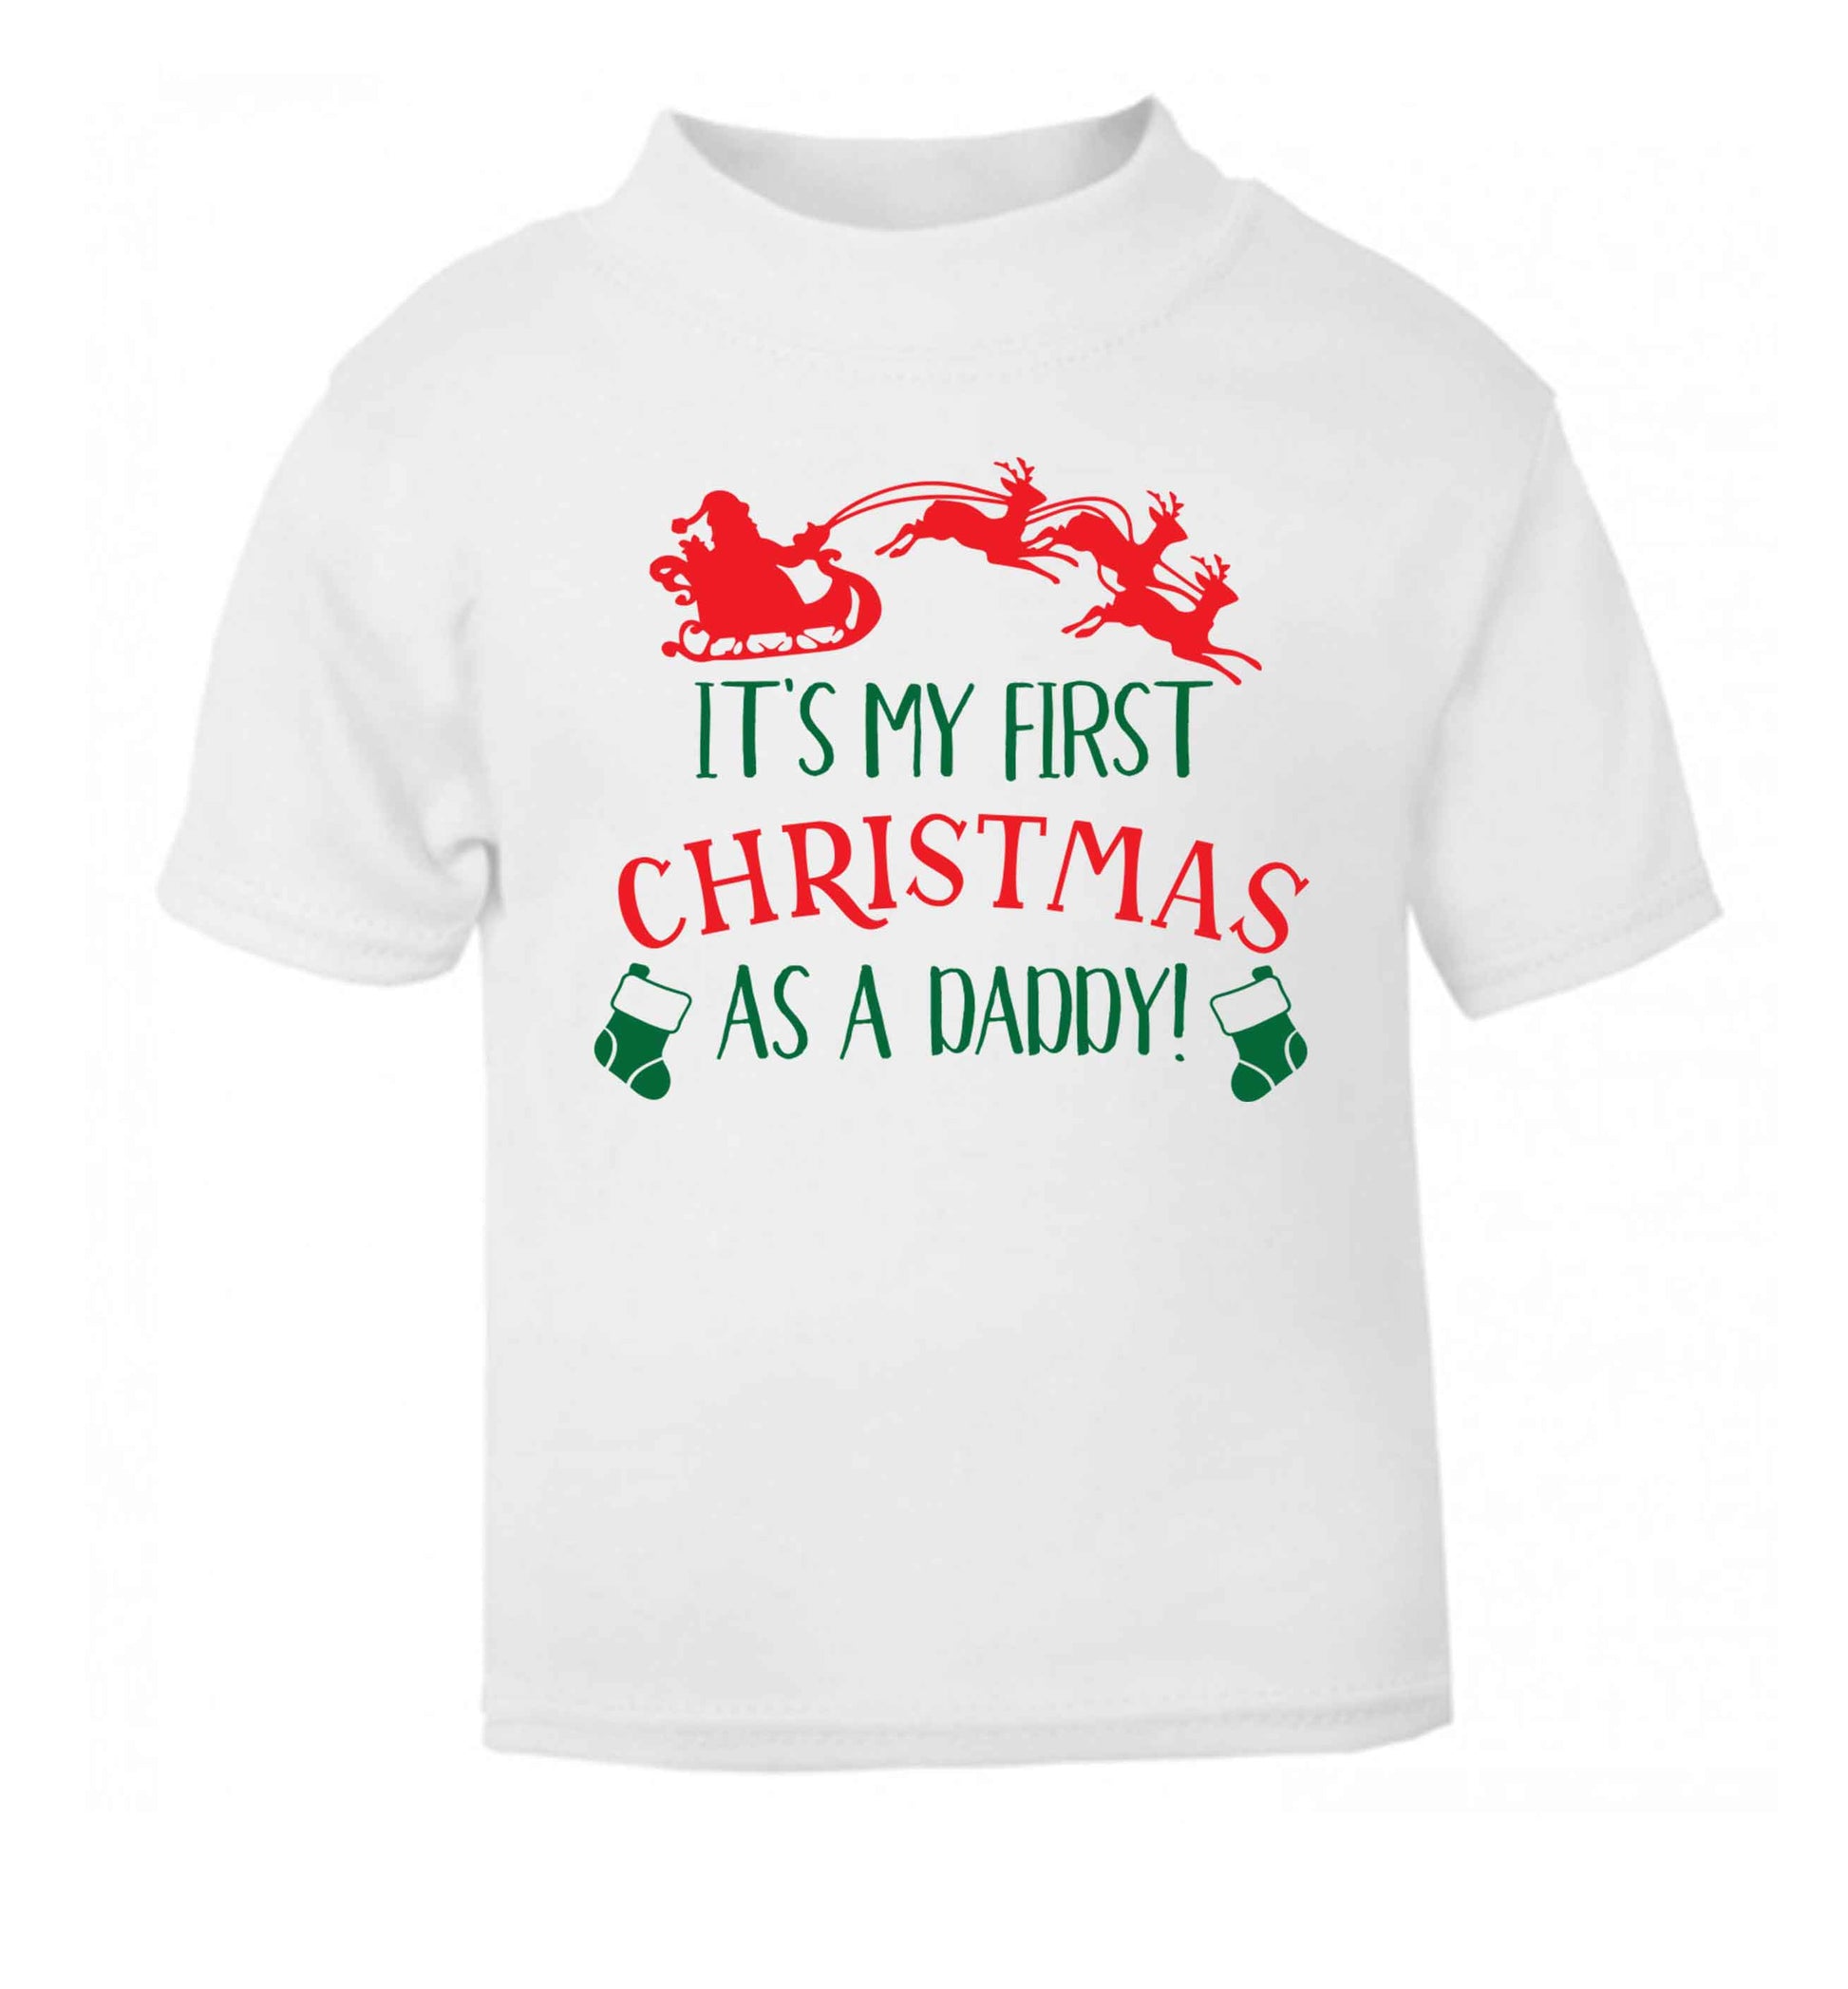 It's my first Christmas as a daddy white Baby Toddler Tshirt 2 Years